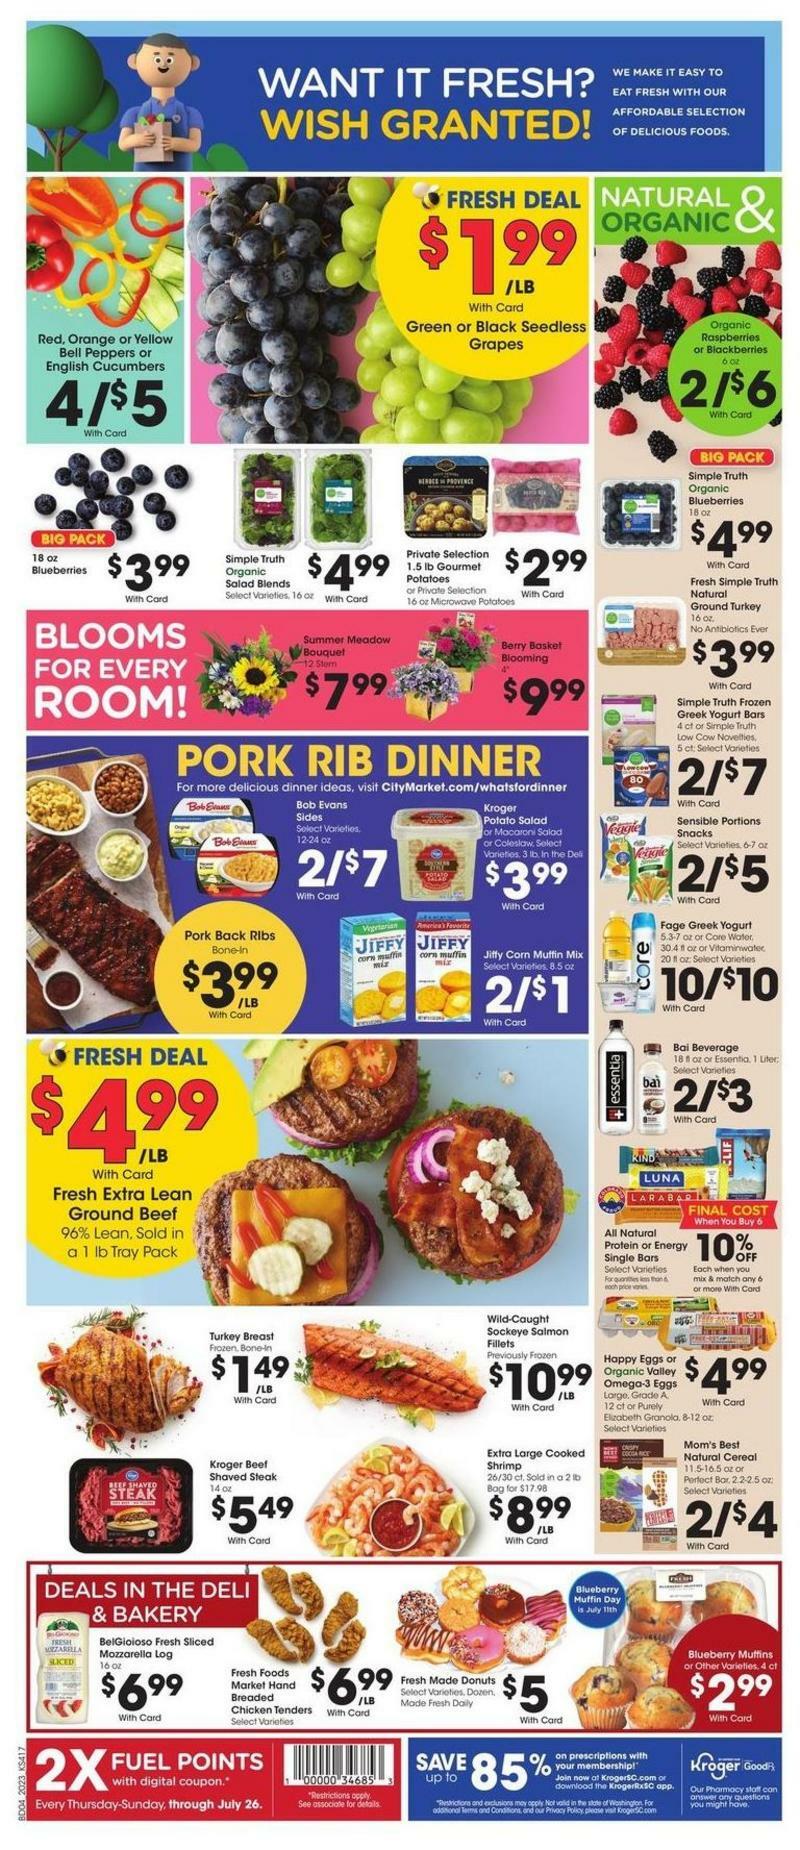 City Market Weekly Ad from July 8